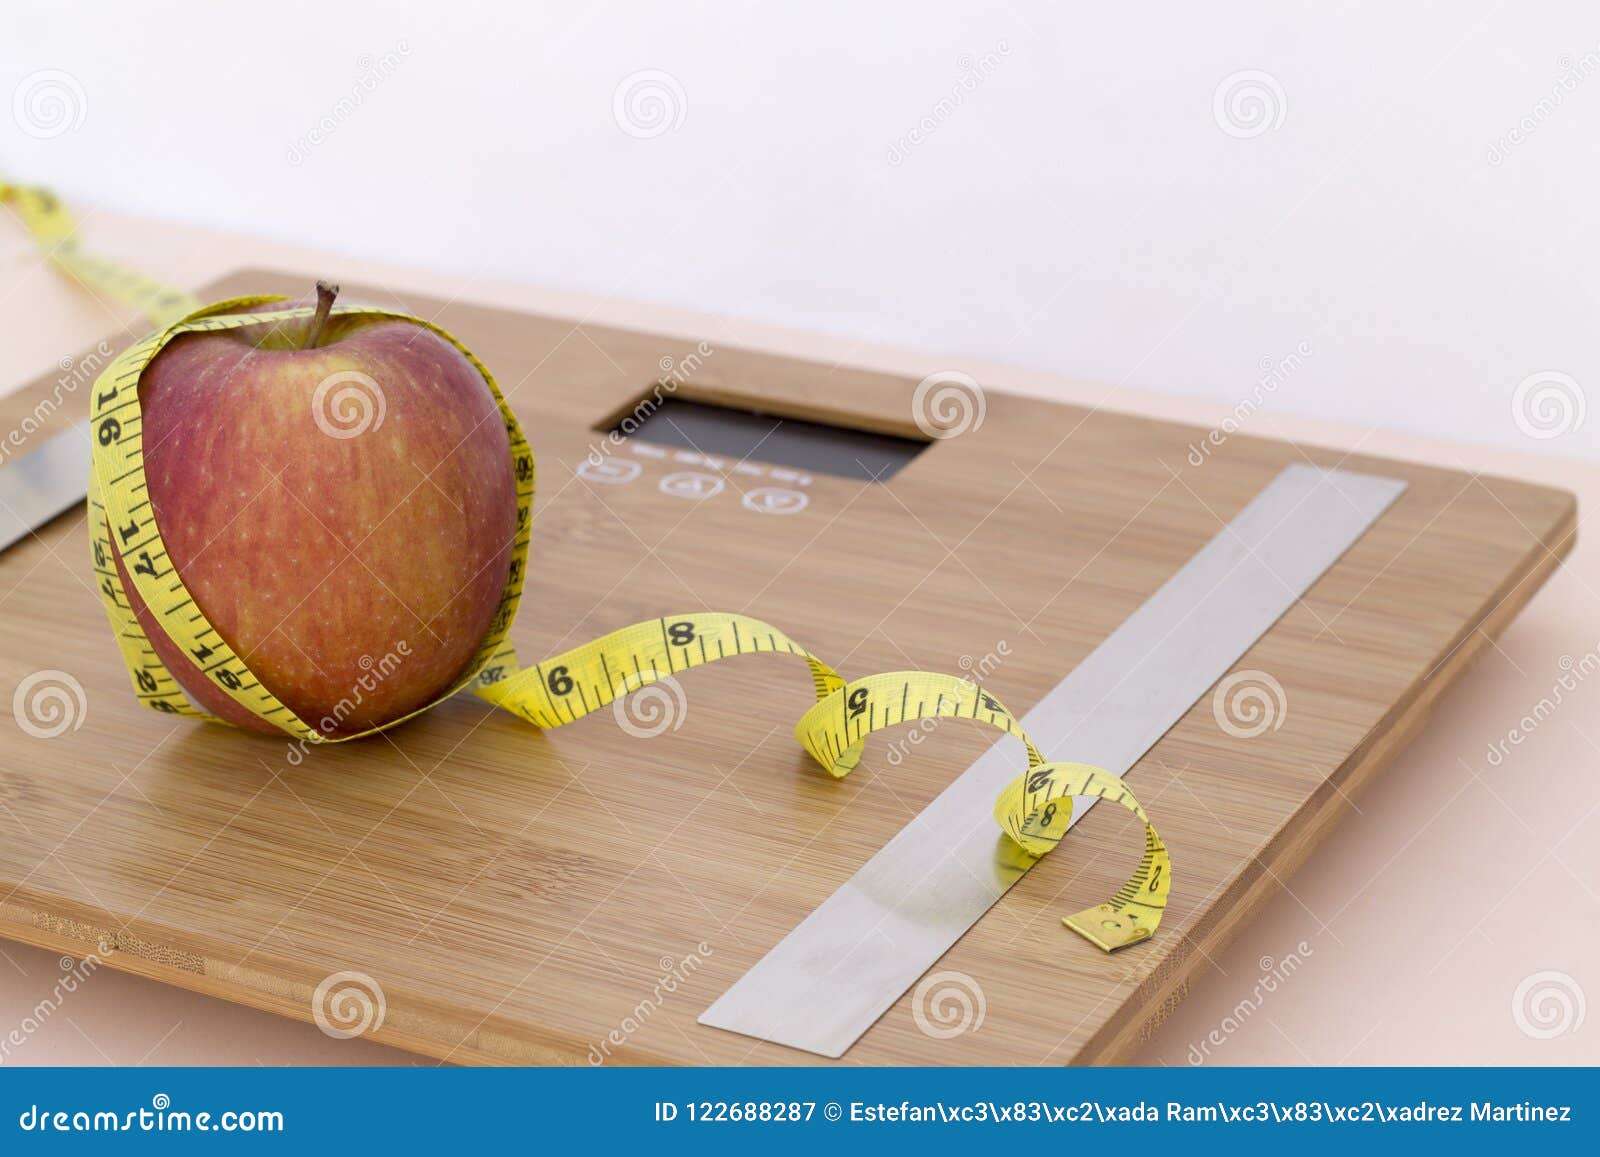 still life photography with an apple, tape mesaure and a scale